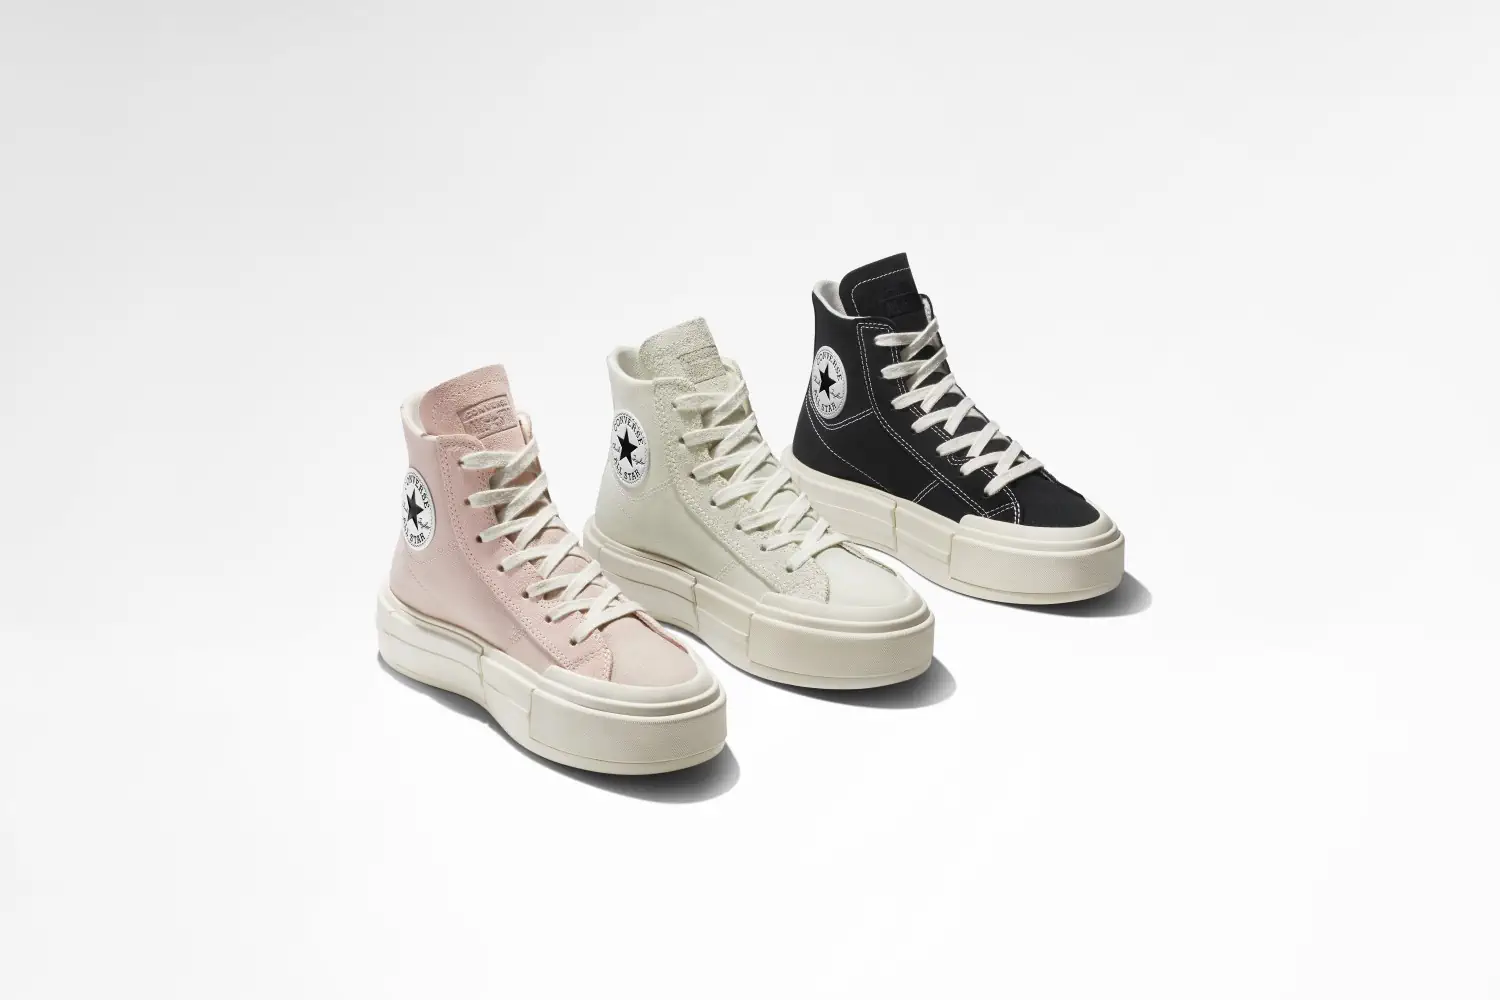 Møde Tutor Fortryd Converse unveils its latest release: Converse Chuck Taylor All Star Cruise  - fashionotography